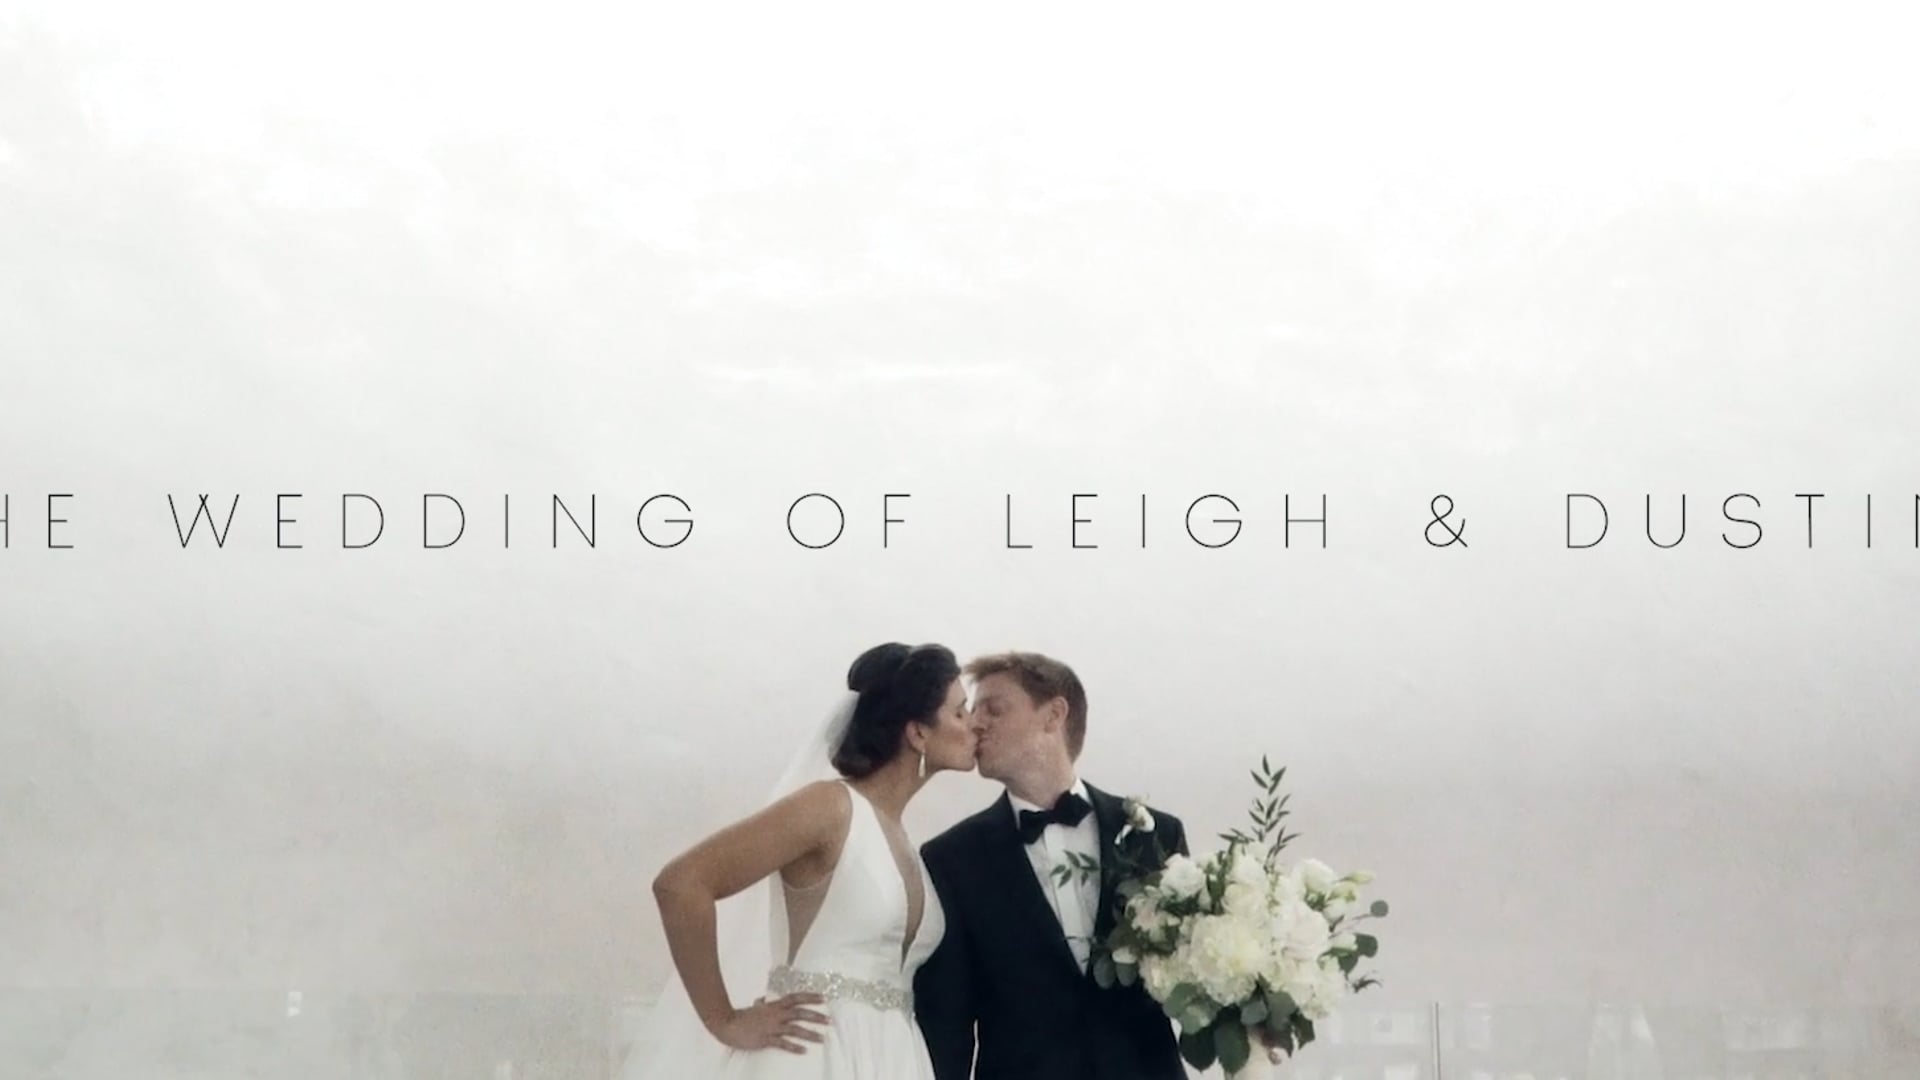 Leigh & Dustin / Dr. Phillips Center for the Performing Arts